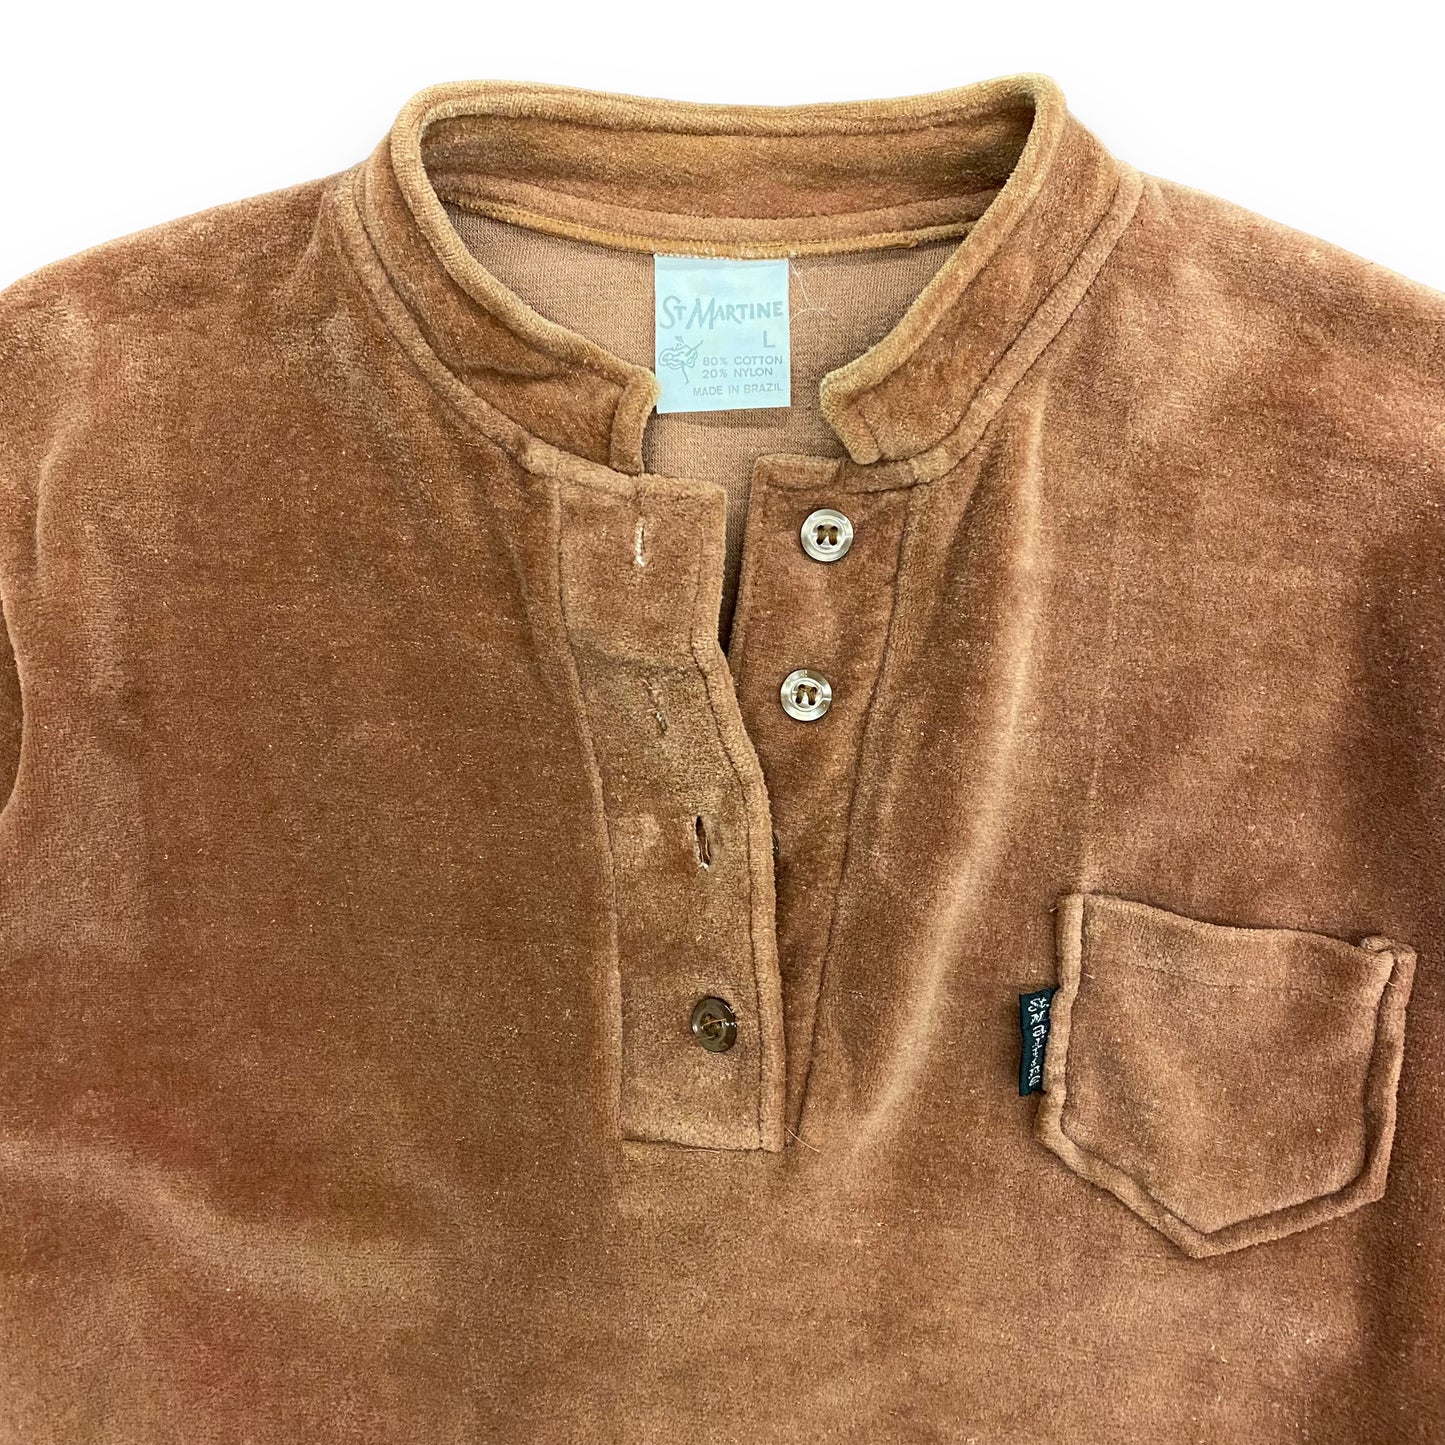 1970s/1980s Brown Velour Henley Shirt - Size Large (Fits Medium)